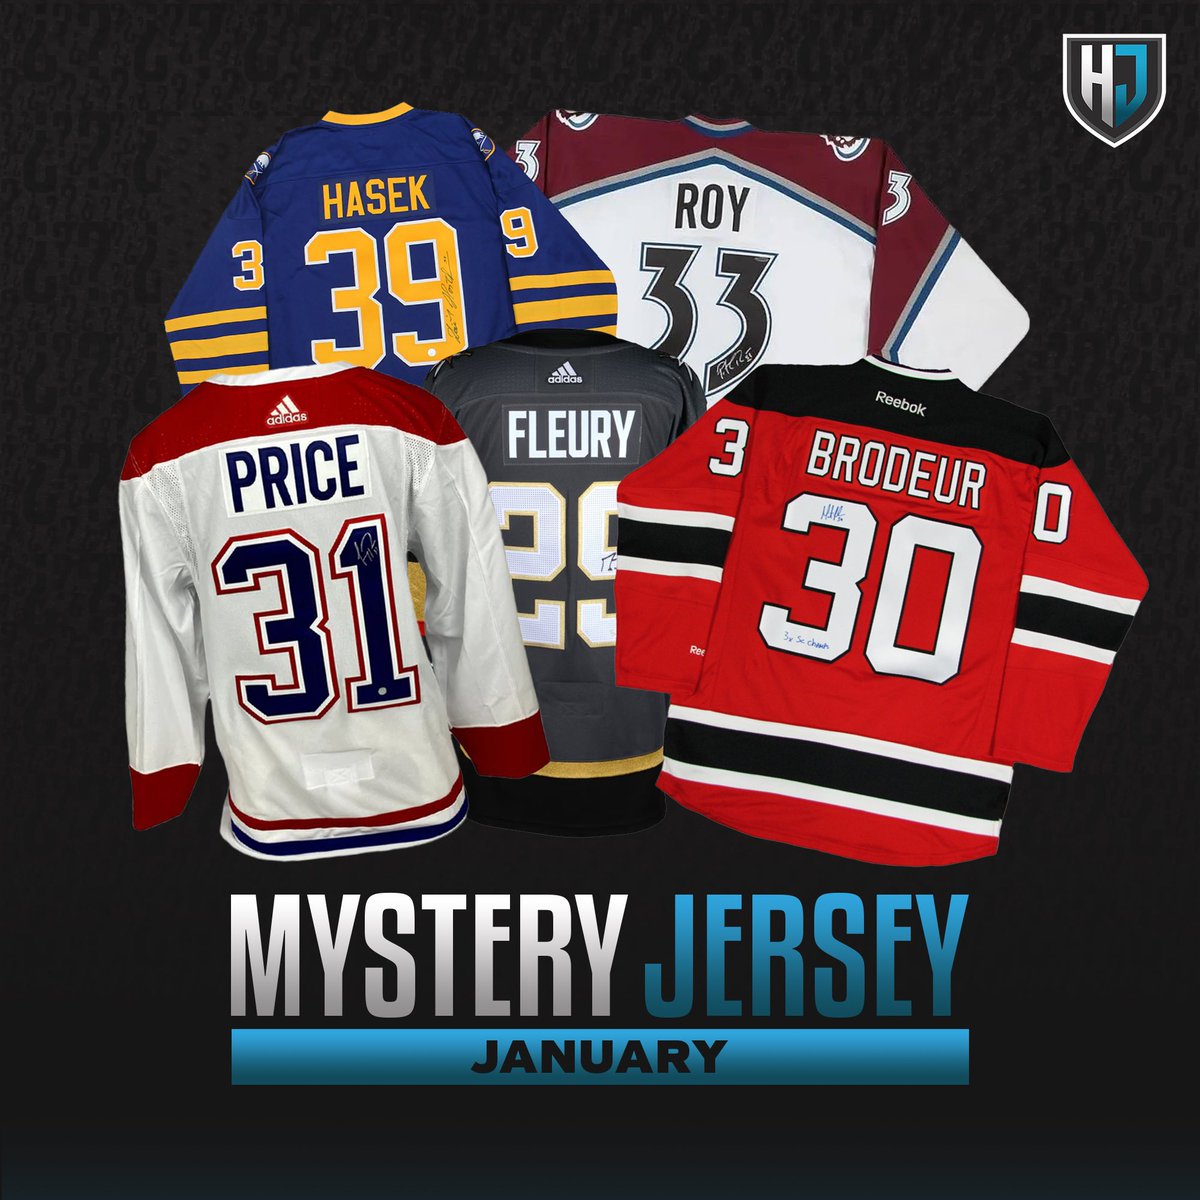 Next Mystery Jersey Drop is TOMORROW Jan 29th @ 8:00 PM EST 1. Signed NHL jerseys w/ COA 2. Reverse Retro 2.0 jerseys 3. NHL ASG/Outdoor Jerseys 4. Game Worn NHL jerseys 5. NHL jersey w/ name 6. Blank NHL jersey This is an incredible value for $85 Value range $100-900 📦❓